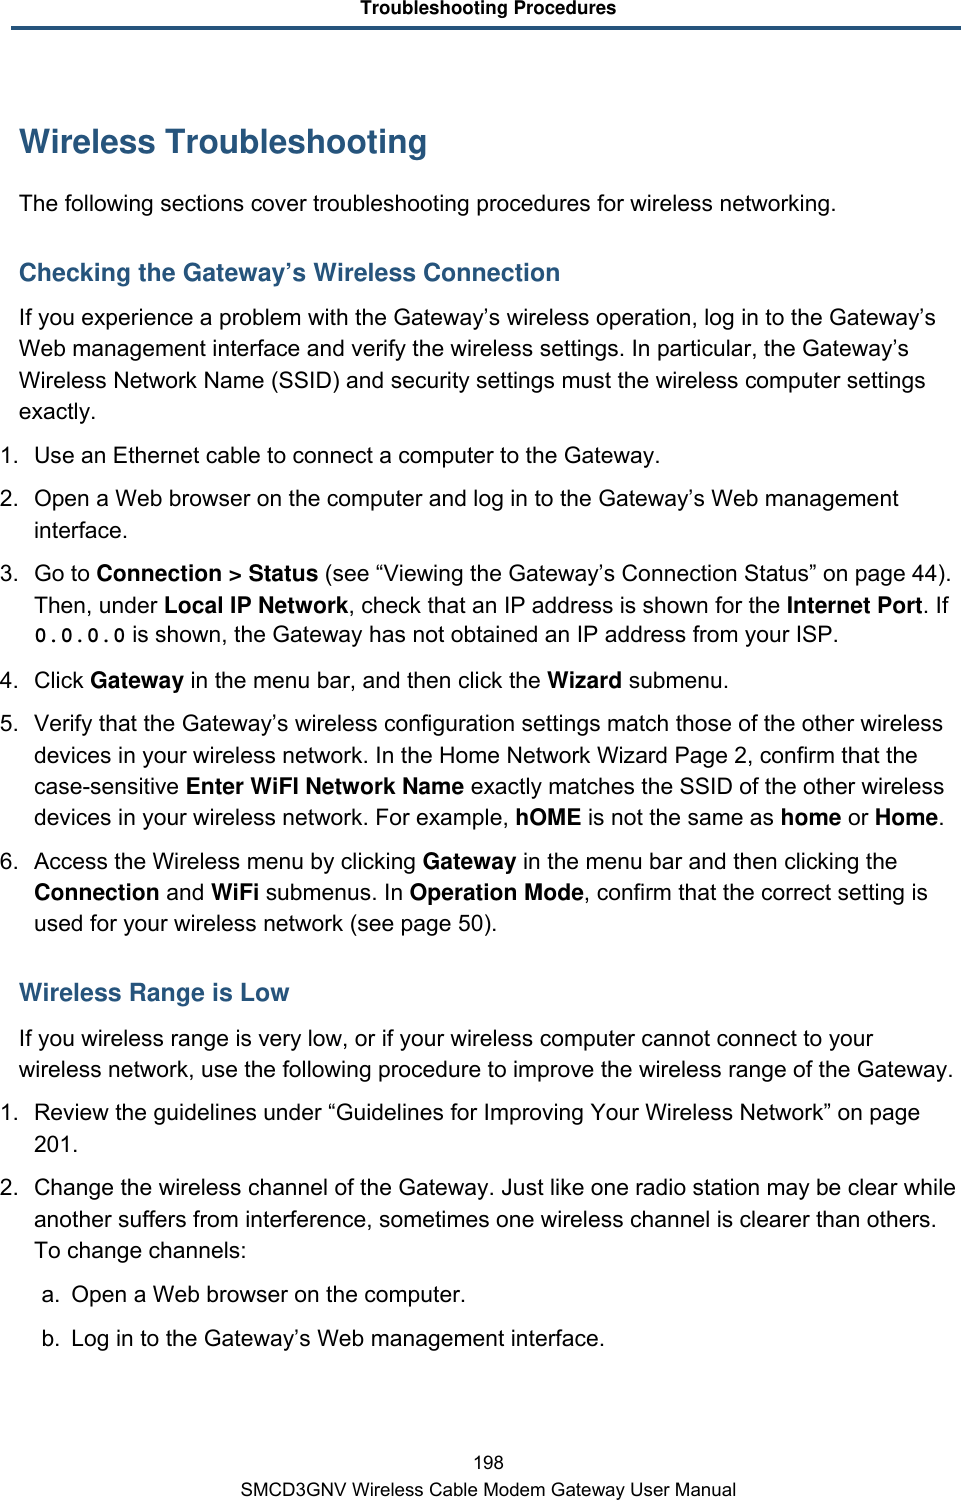 Troubleshooting Procedures 198 SMCD3GNV Wireless Cable Modem Gateway User Manual Wireless Troubleshooting The following sections cover troubleshooting procedures for wireless networking. Checking the Gateway’s Wireless Connection If you experience a problem with the Gateway’s wireless operation, log in to the Gateway’s Web management interface and verify the wireless settings. In particular, the Gateway’s Wireless Network Name (SSID) and security settings must the wireless computer settings exactly. 1. Use an Ethernet cable to connect a computer to the Gateway. 2. Open a Web browser on the computer and log in to the Gateway’s Web management interface. 3. Go to Connection &gt; Status (see “Viewing the Gateway’s Connection Status” on page 44). Then, under Local IP Network, check that an IP address is shown for the Internet Port. If 0.0.0.0 is shown, the Gateway has not obtained an IP address from your ISP. 4. Click Gateway in the menu bar, and then click the Wizard submenu. 5. Verify that the Gateway’s wireless configuration settings match those of the other wireless devices in your wireless network. In the Home Network Wizard Page 2, confirm that the case-sensitive Enter WiFI Network Name exactly matches the SSID of the other wireless devices in your wireless network. For example, hOME is not the same as home or Home. 6. Access the Wireless menu by clicking Gateway in the menu bar and then clicking the Connection and WiFi submenus. In Operation Mode, confirm that the correct setting is used for your wireless network (see page 50). Wireless Range is Low If you wireless range is very low, or if your wireless computer cannot connect to your wireless network, use the following procedure to improve the wireless range of the Gateway. 1. Review the guidelines under “Guidelines for Improving Your Wireless Network” on page 201. 2. Change the wireless channel of the Gateway. Just like one radio station may be clear while another suffers from interference, sometimes one wireless channel is clearer than others. To change channels: a. Open a Web browser on the computer. b. Log in to the Gateway’s Web management interface. 